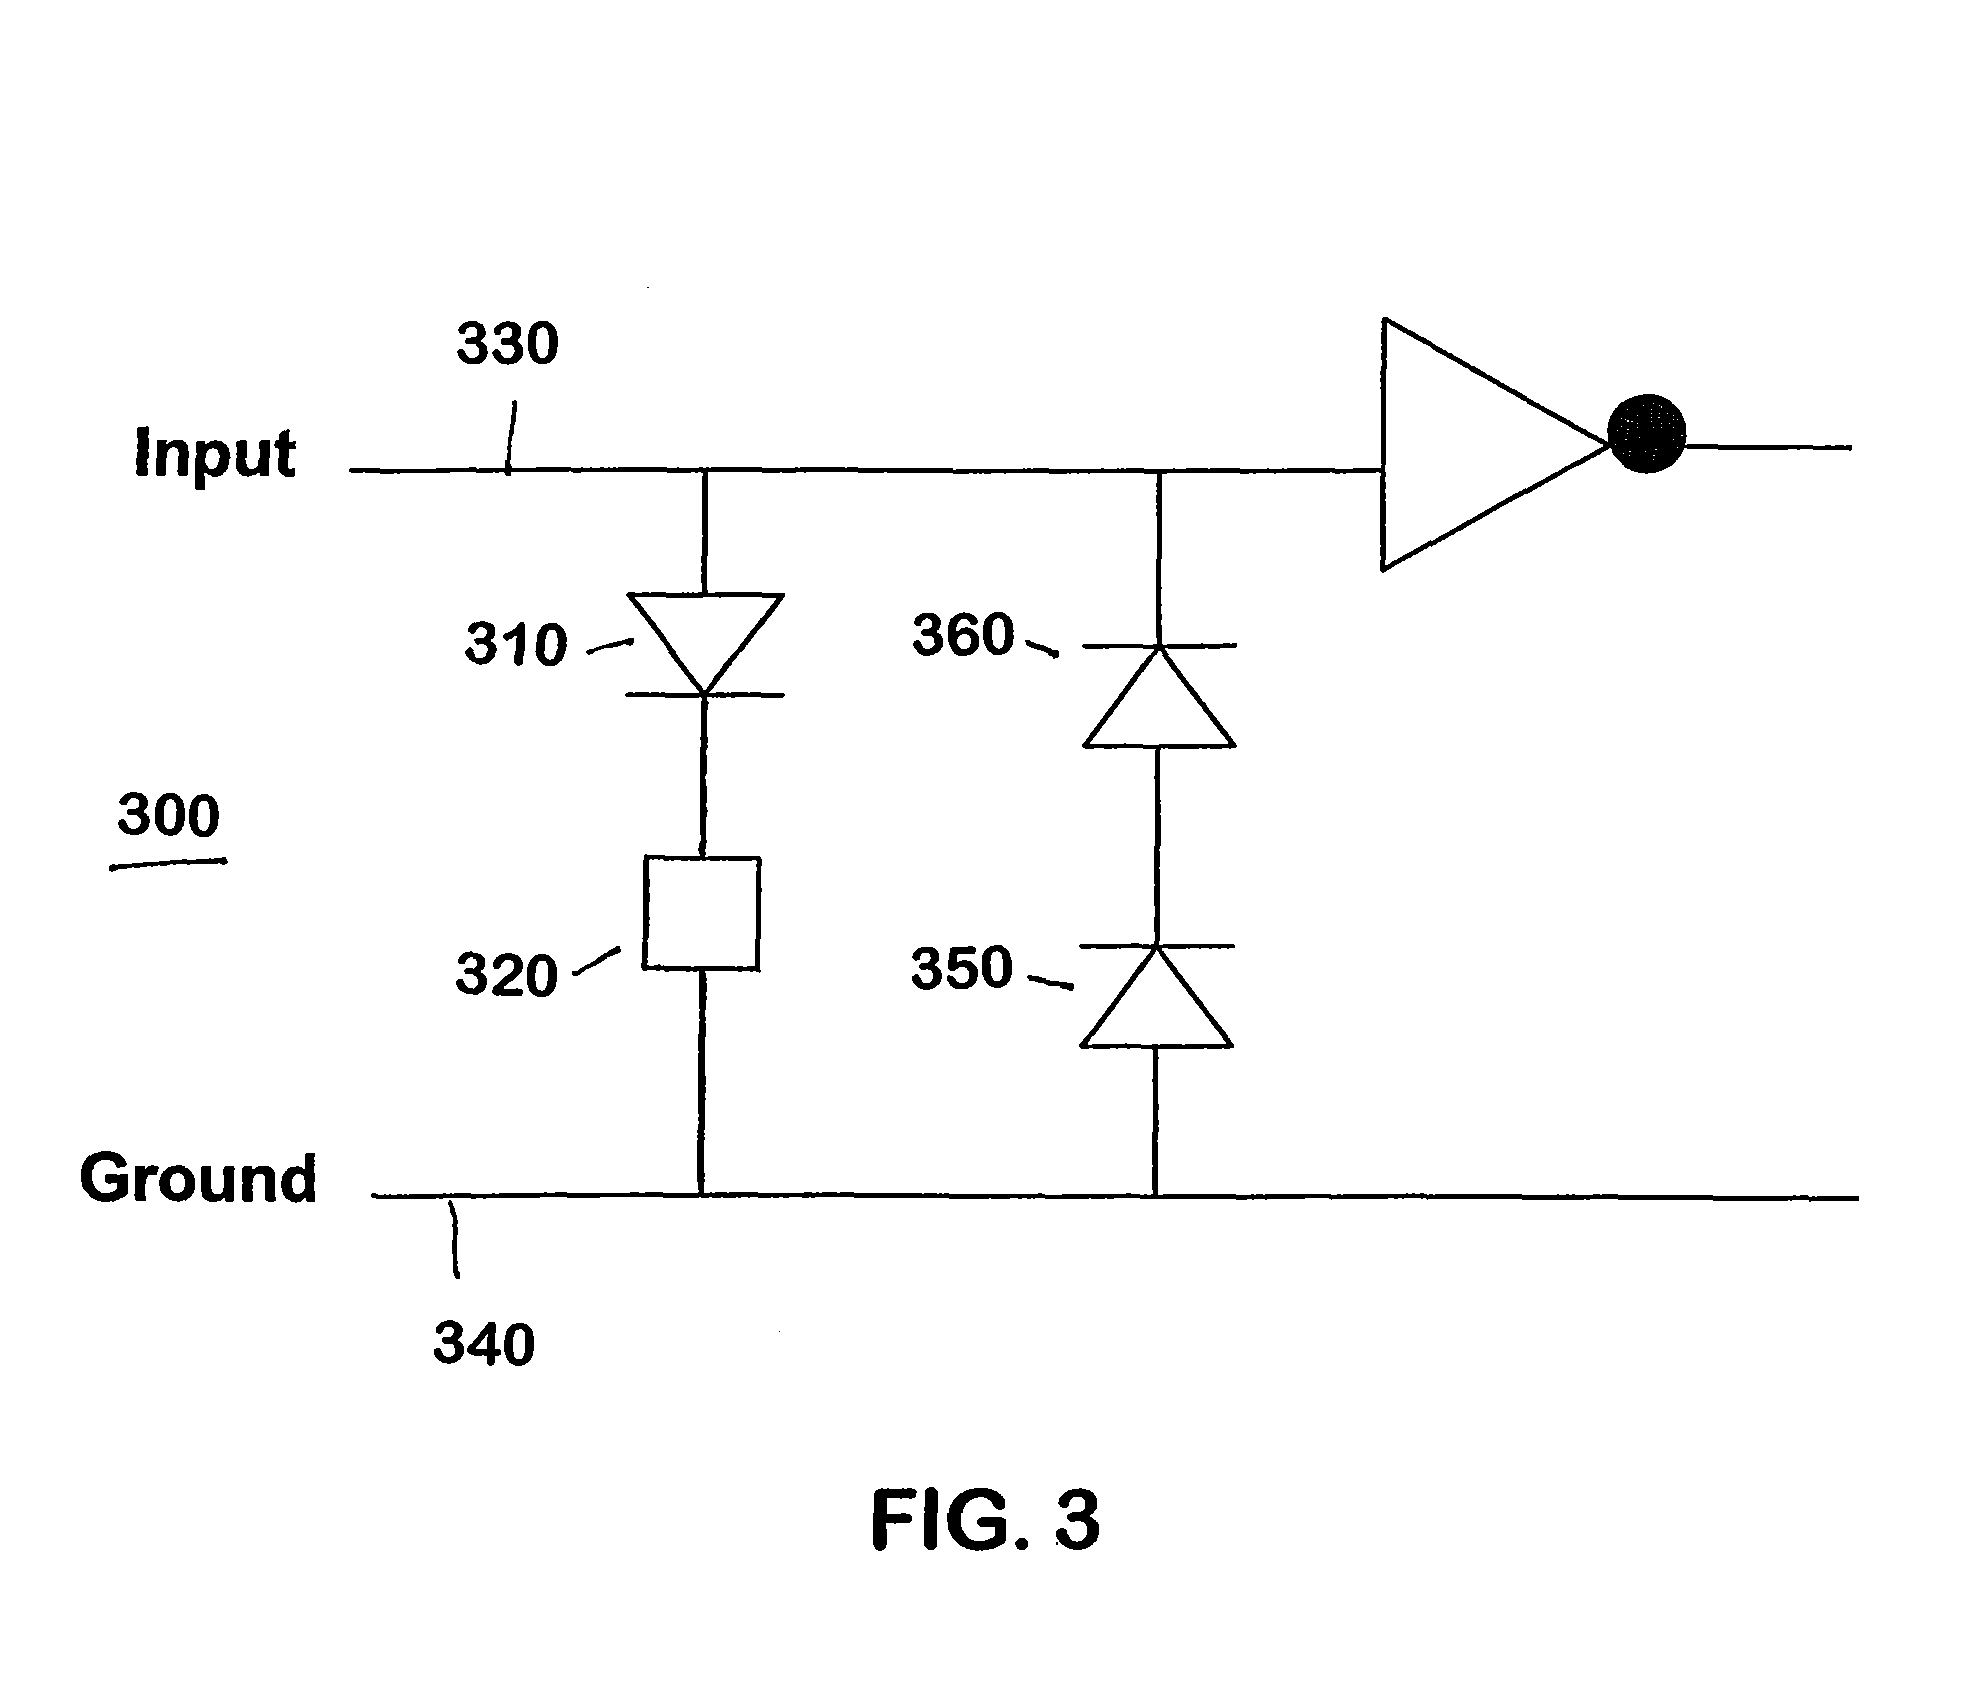 Low capacitance ESD protection structure for high speed input pins